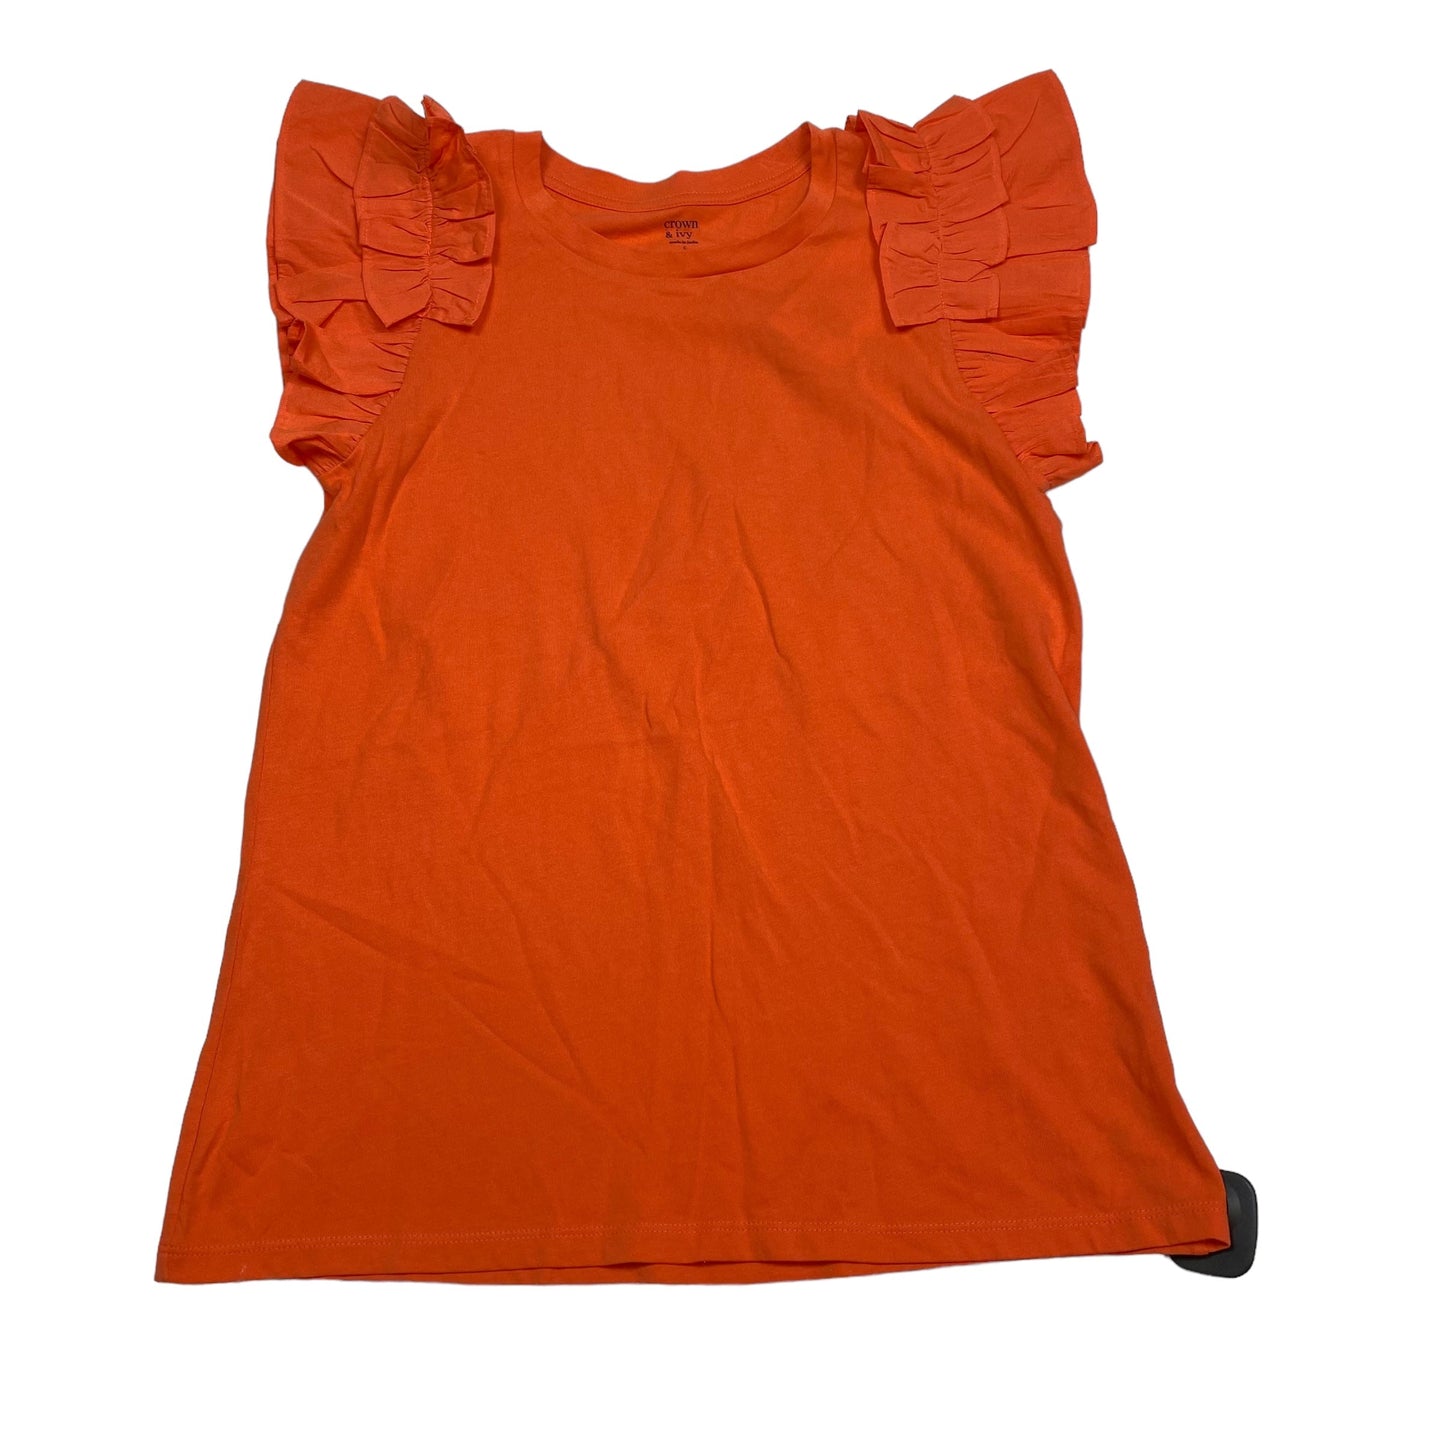 Orange Top Sleeveless Crown And Ivy, Size S